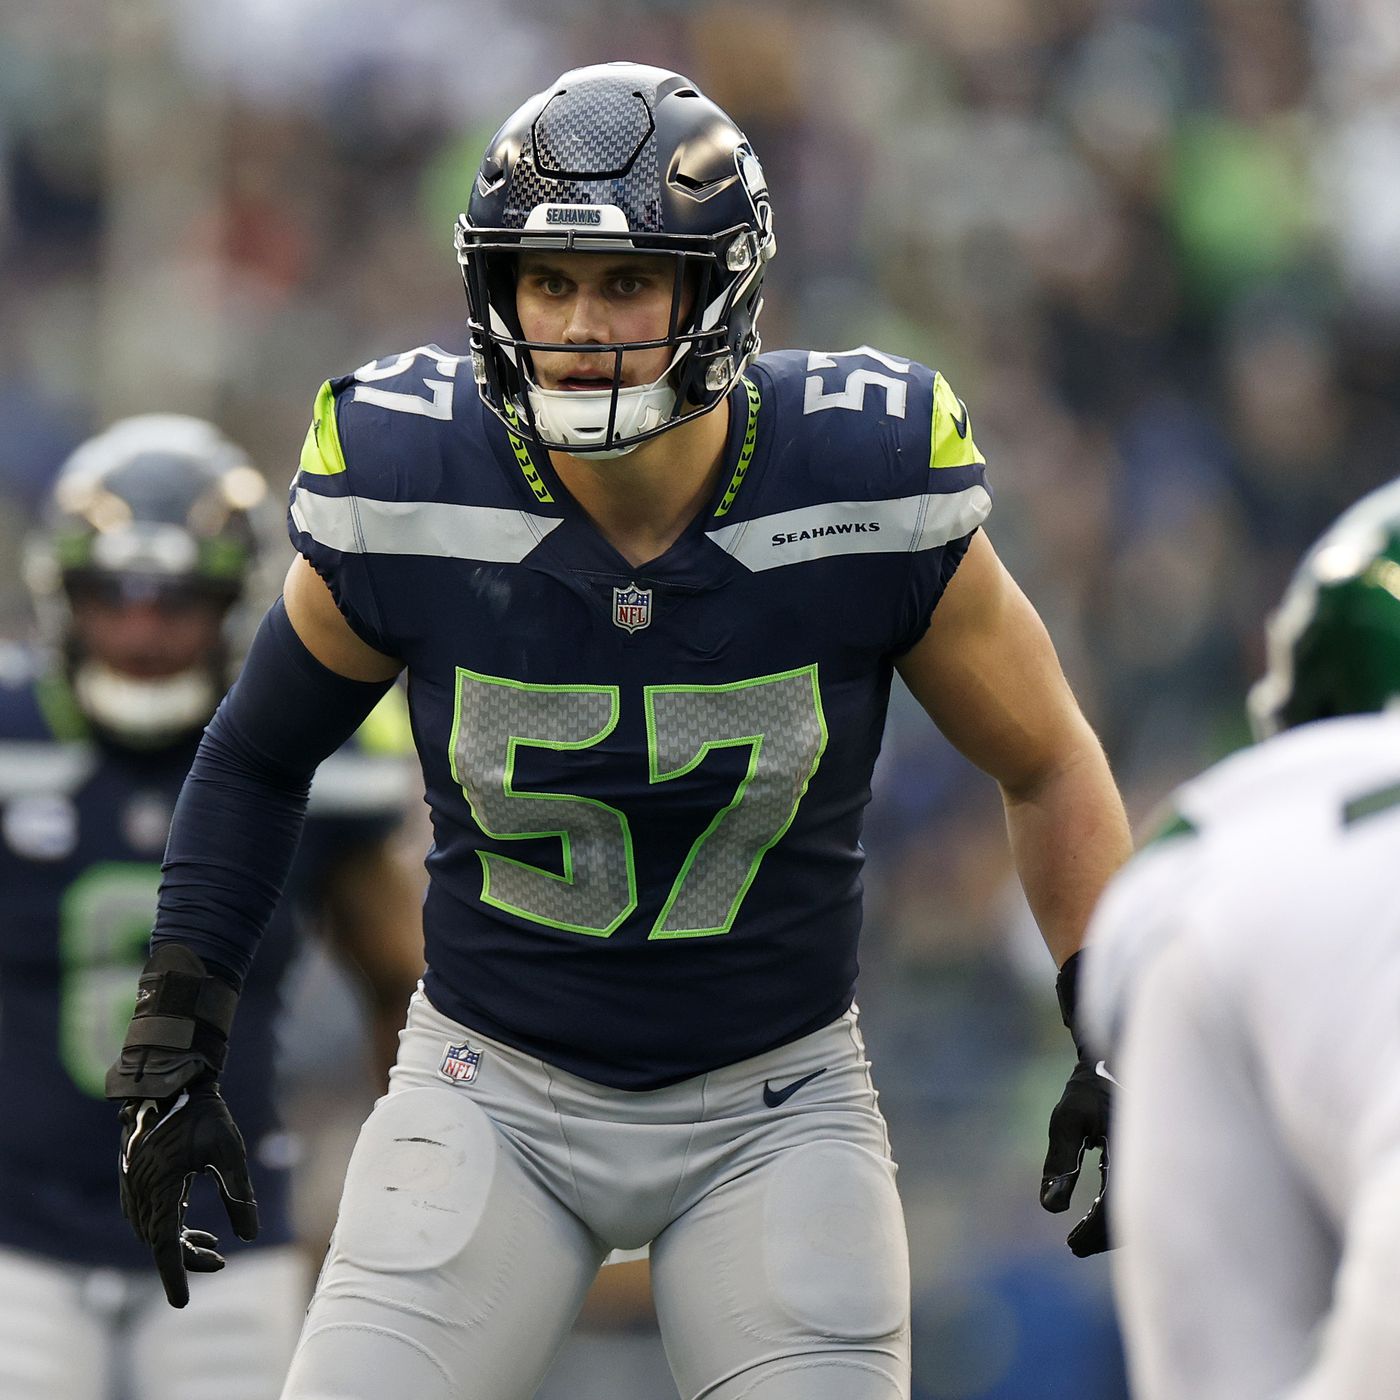 Heaps: Cody Barton should be most excited Seahawks player after